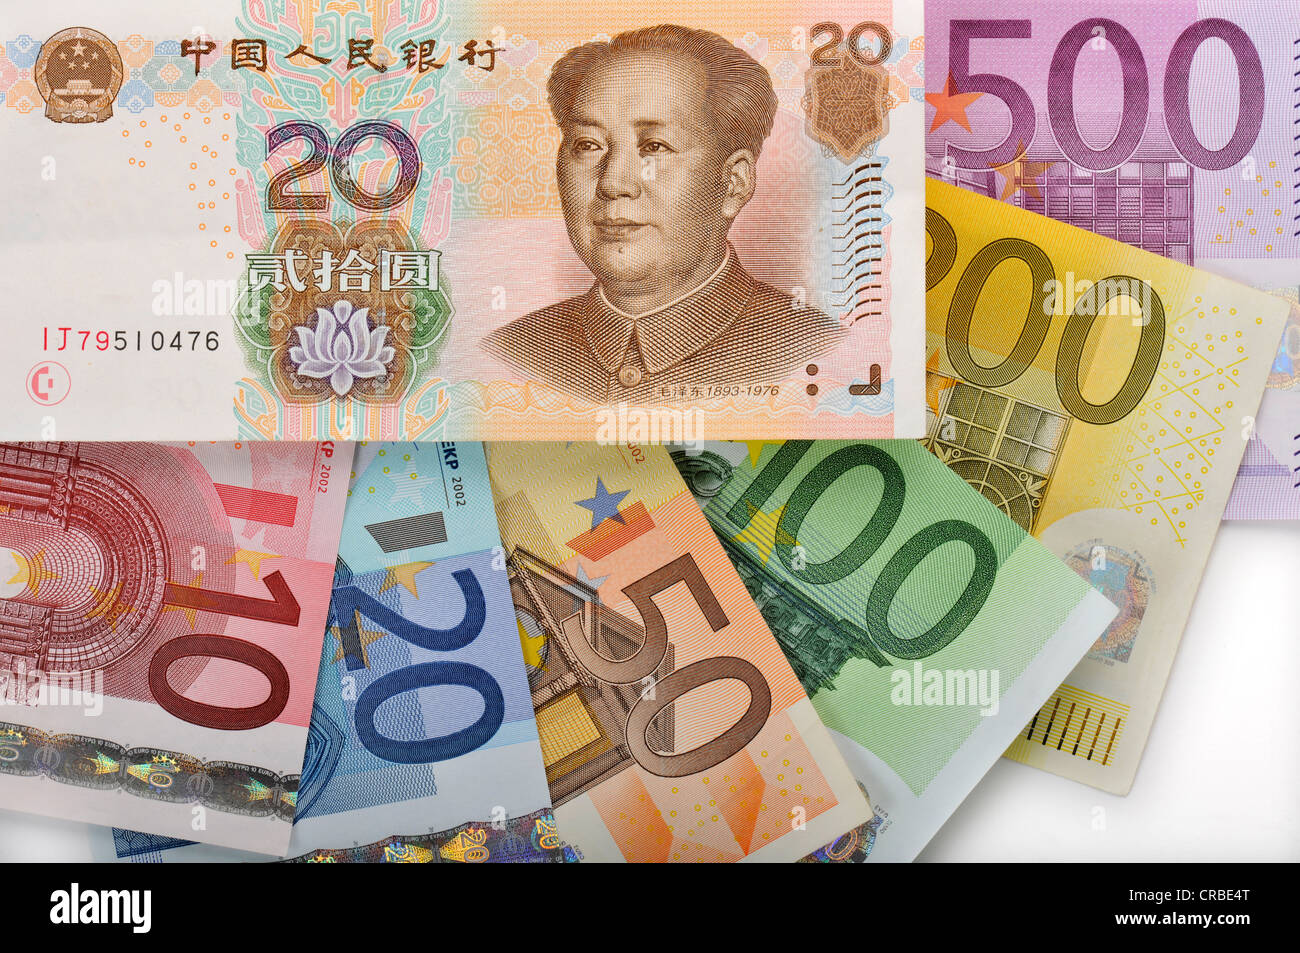 Symbolic image for exchange rates, Chinese yuan, renminbi, currency of the People's Republic of China, in the West Yuán Stock Photo